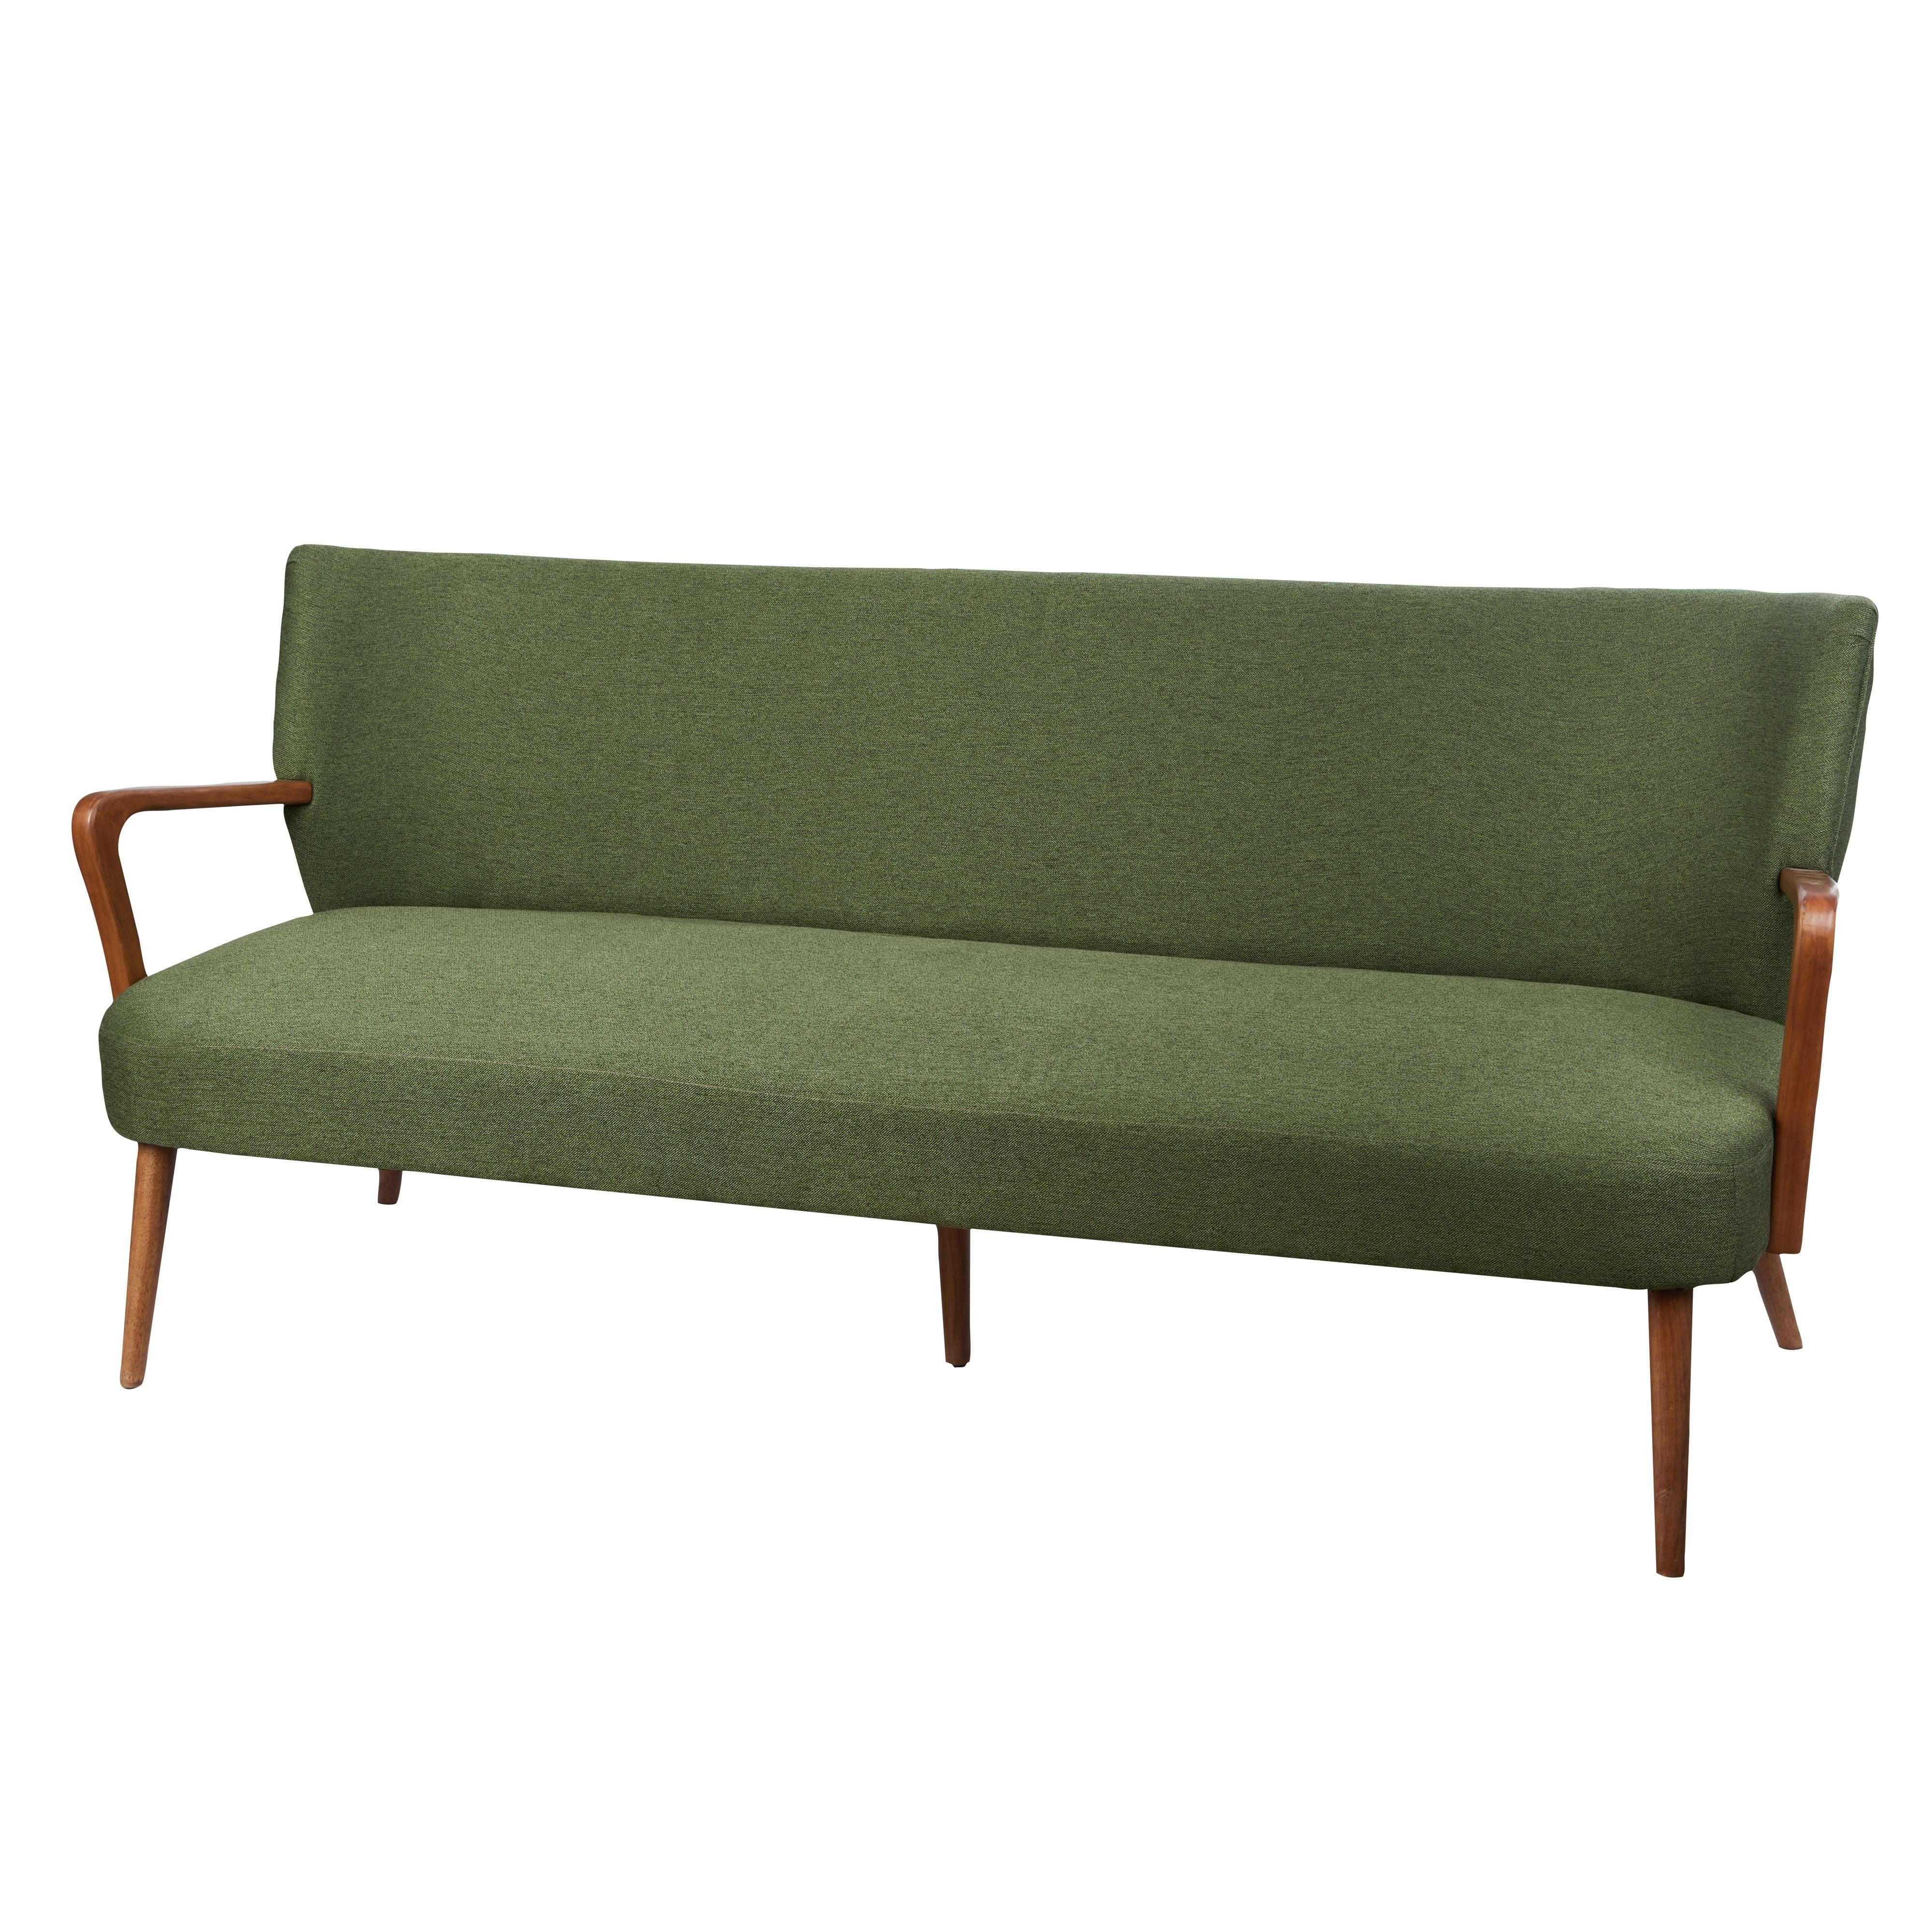 Darcy 3 Seater Sofa-Furniture-Academy Home Goods-The Bay Room